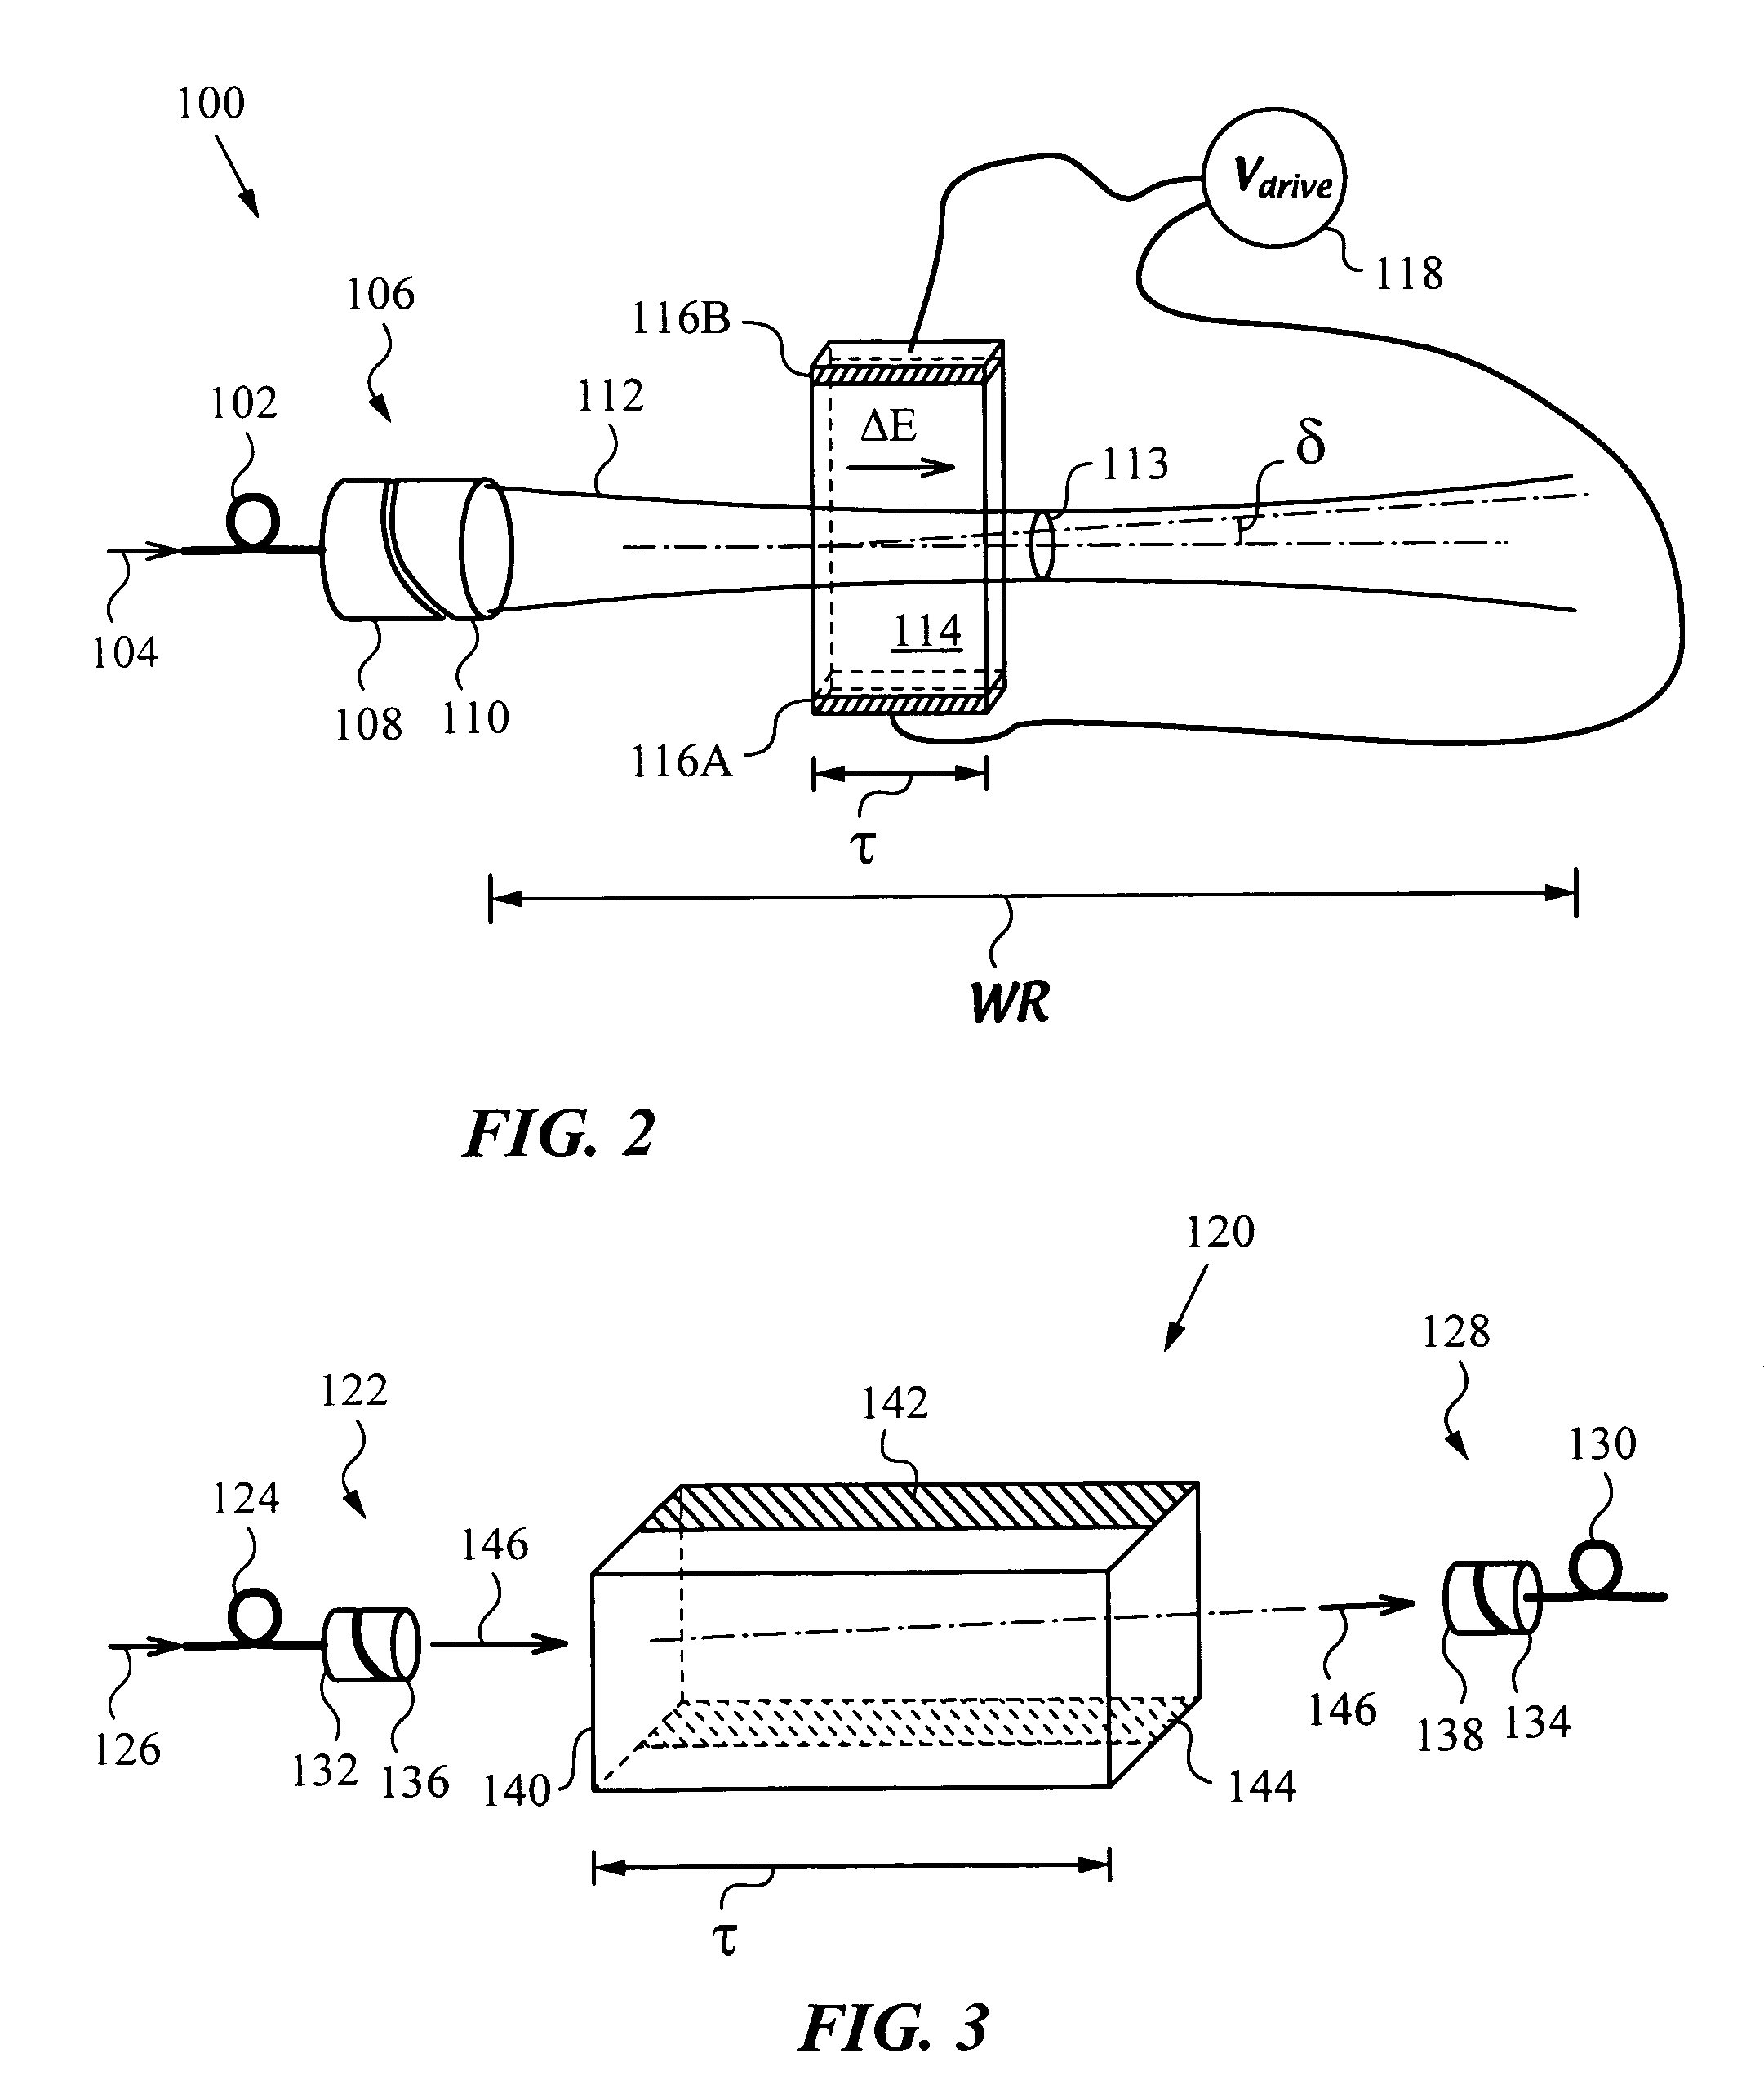 Fiberoptic reconfigurable devices with beam shaping for low-voltage operation